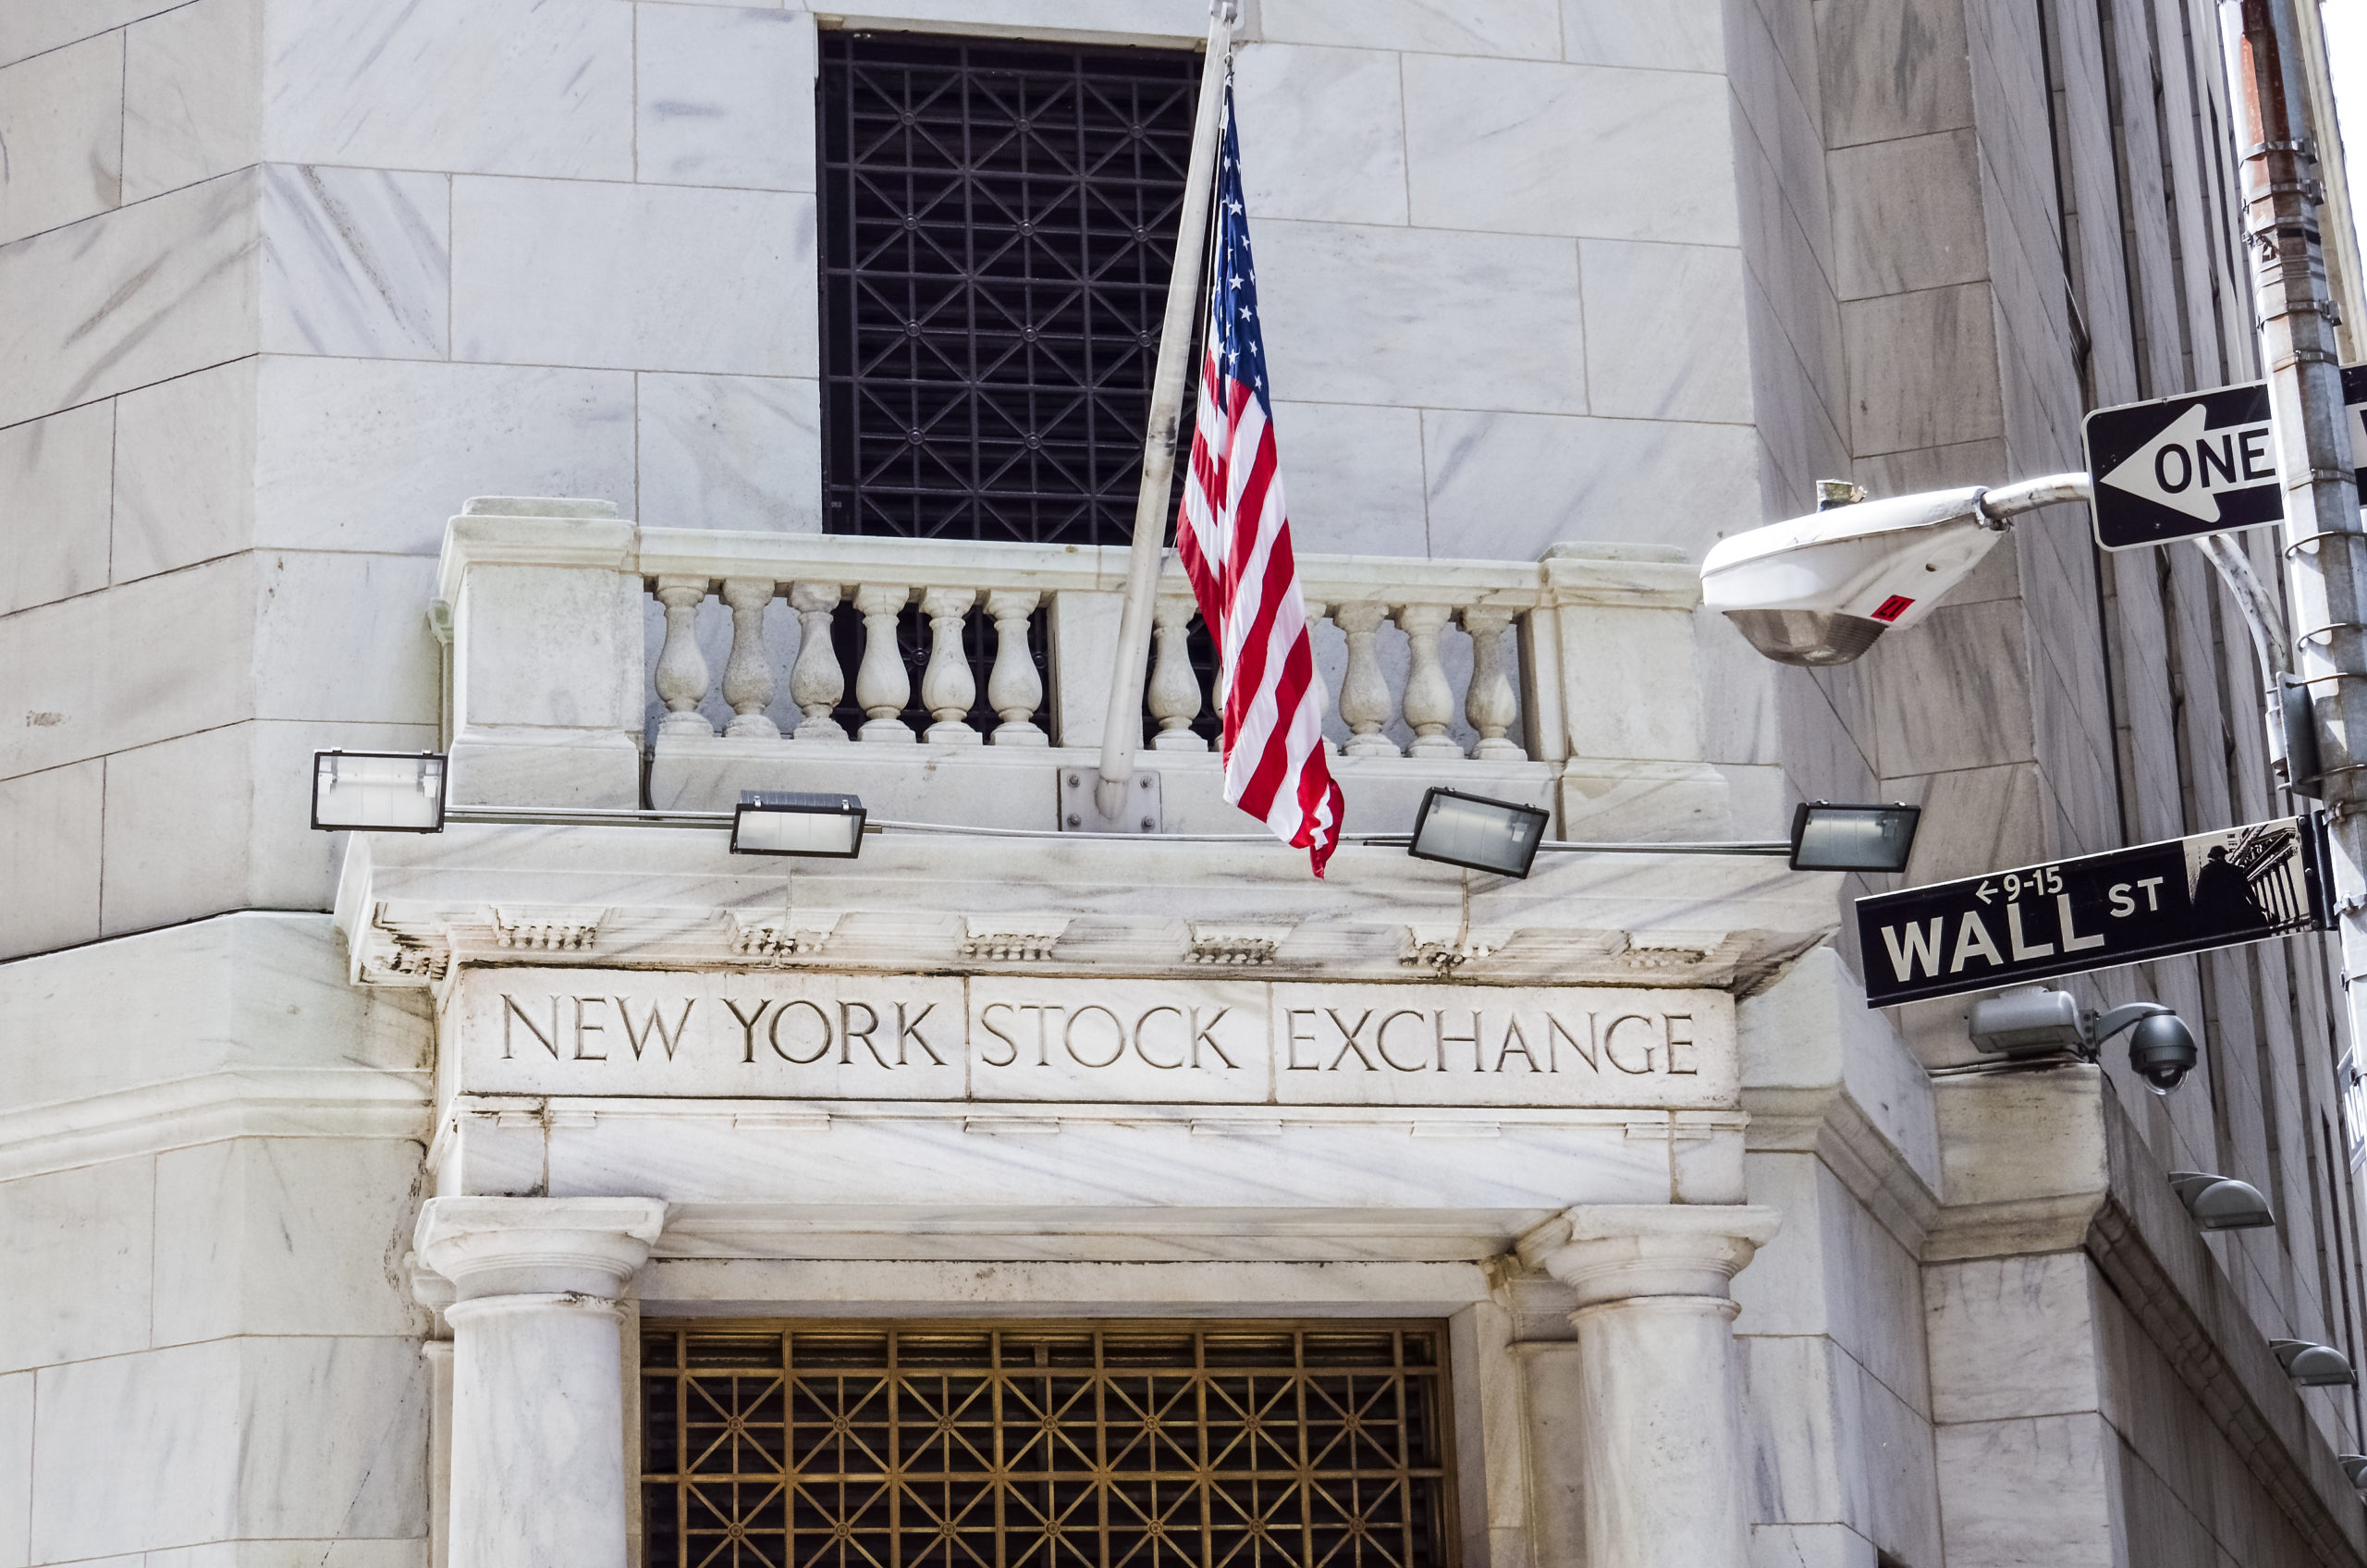 The Most Important Tips for Investing On the US Stock Market From a Market Analyst